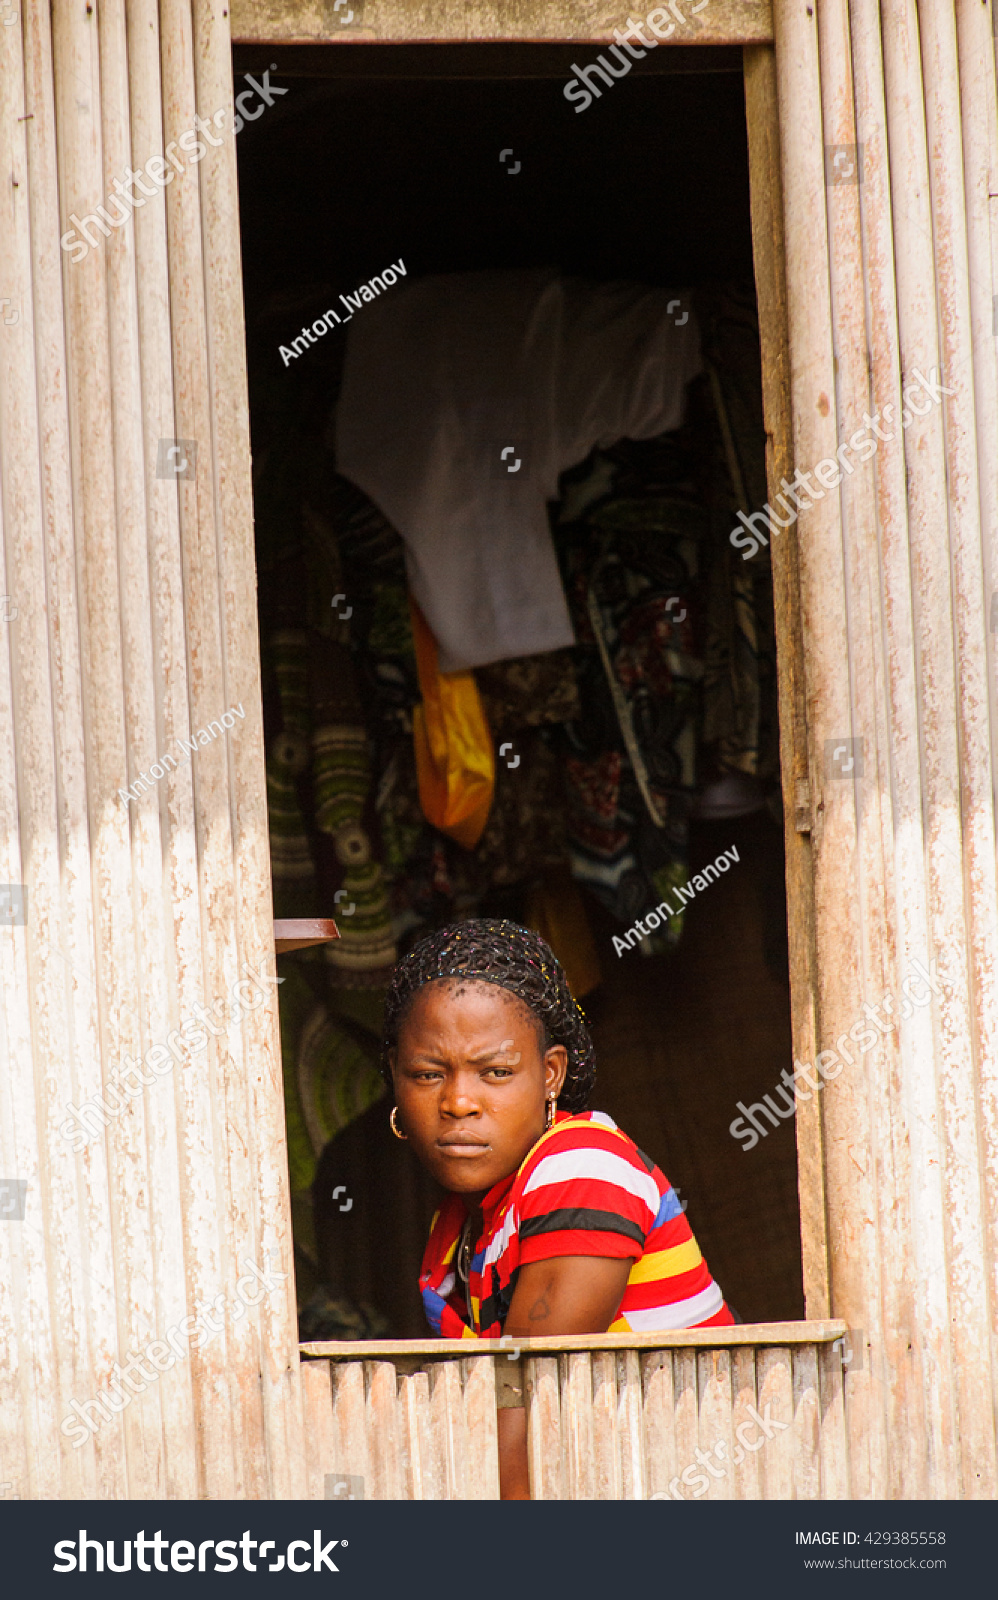 PORTO-NOVO, BENIN - MAR 9, 2012: Unidentified Beninese girl looks out of the window. People of Benin suffer of poverty due to the difficult economic situation #429385558